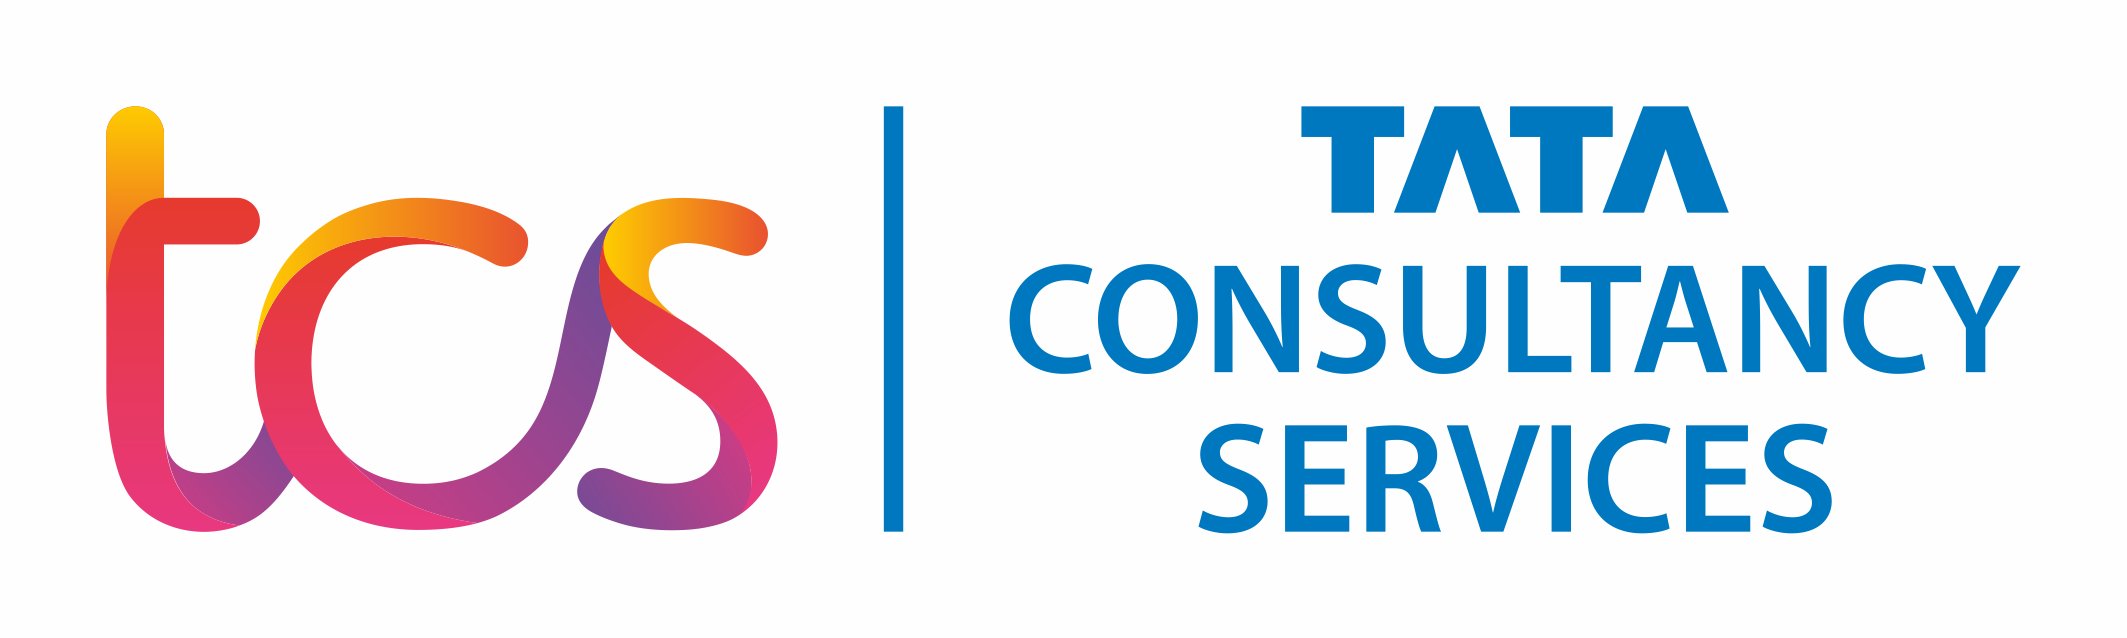 TCS – TATA CONSULTANCY SERVICES